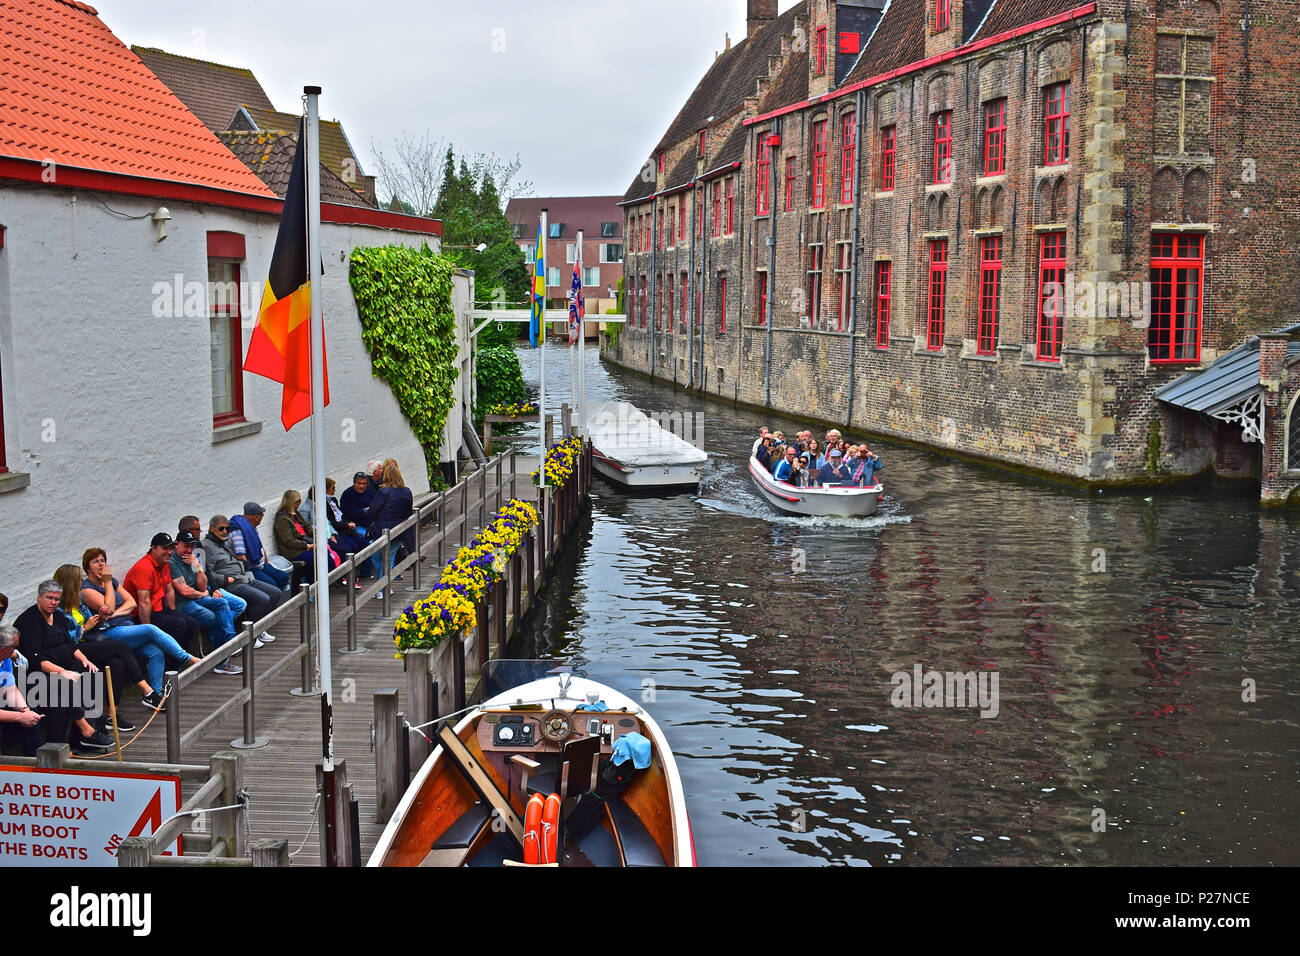 Passengers waiting patiently for the arrival of a canal boat for a tour of the city centre waterways of Bruges or Brugge, Belgium Stock Photo